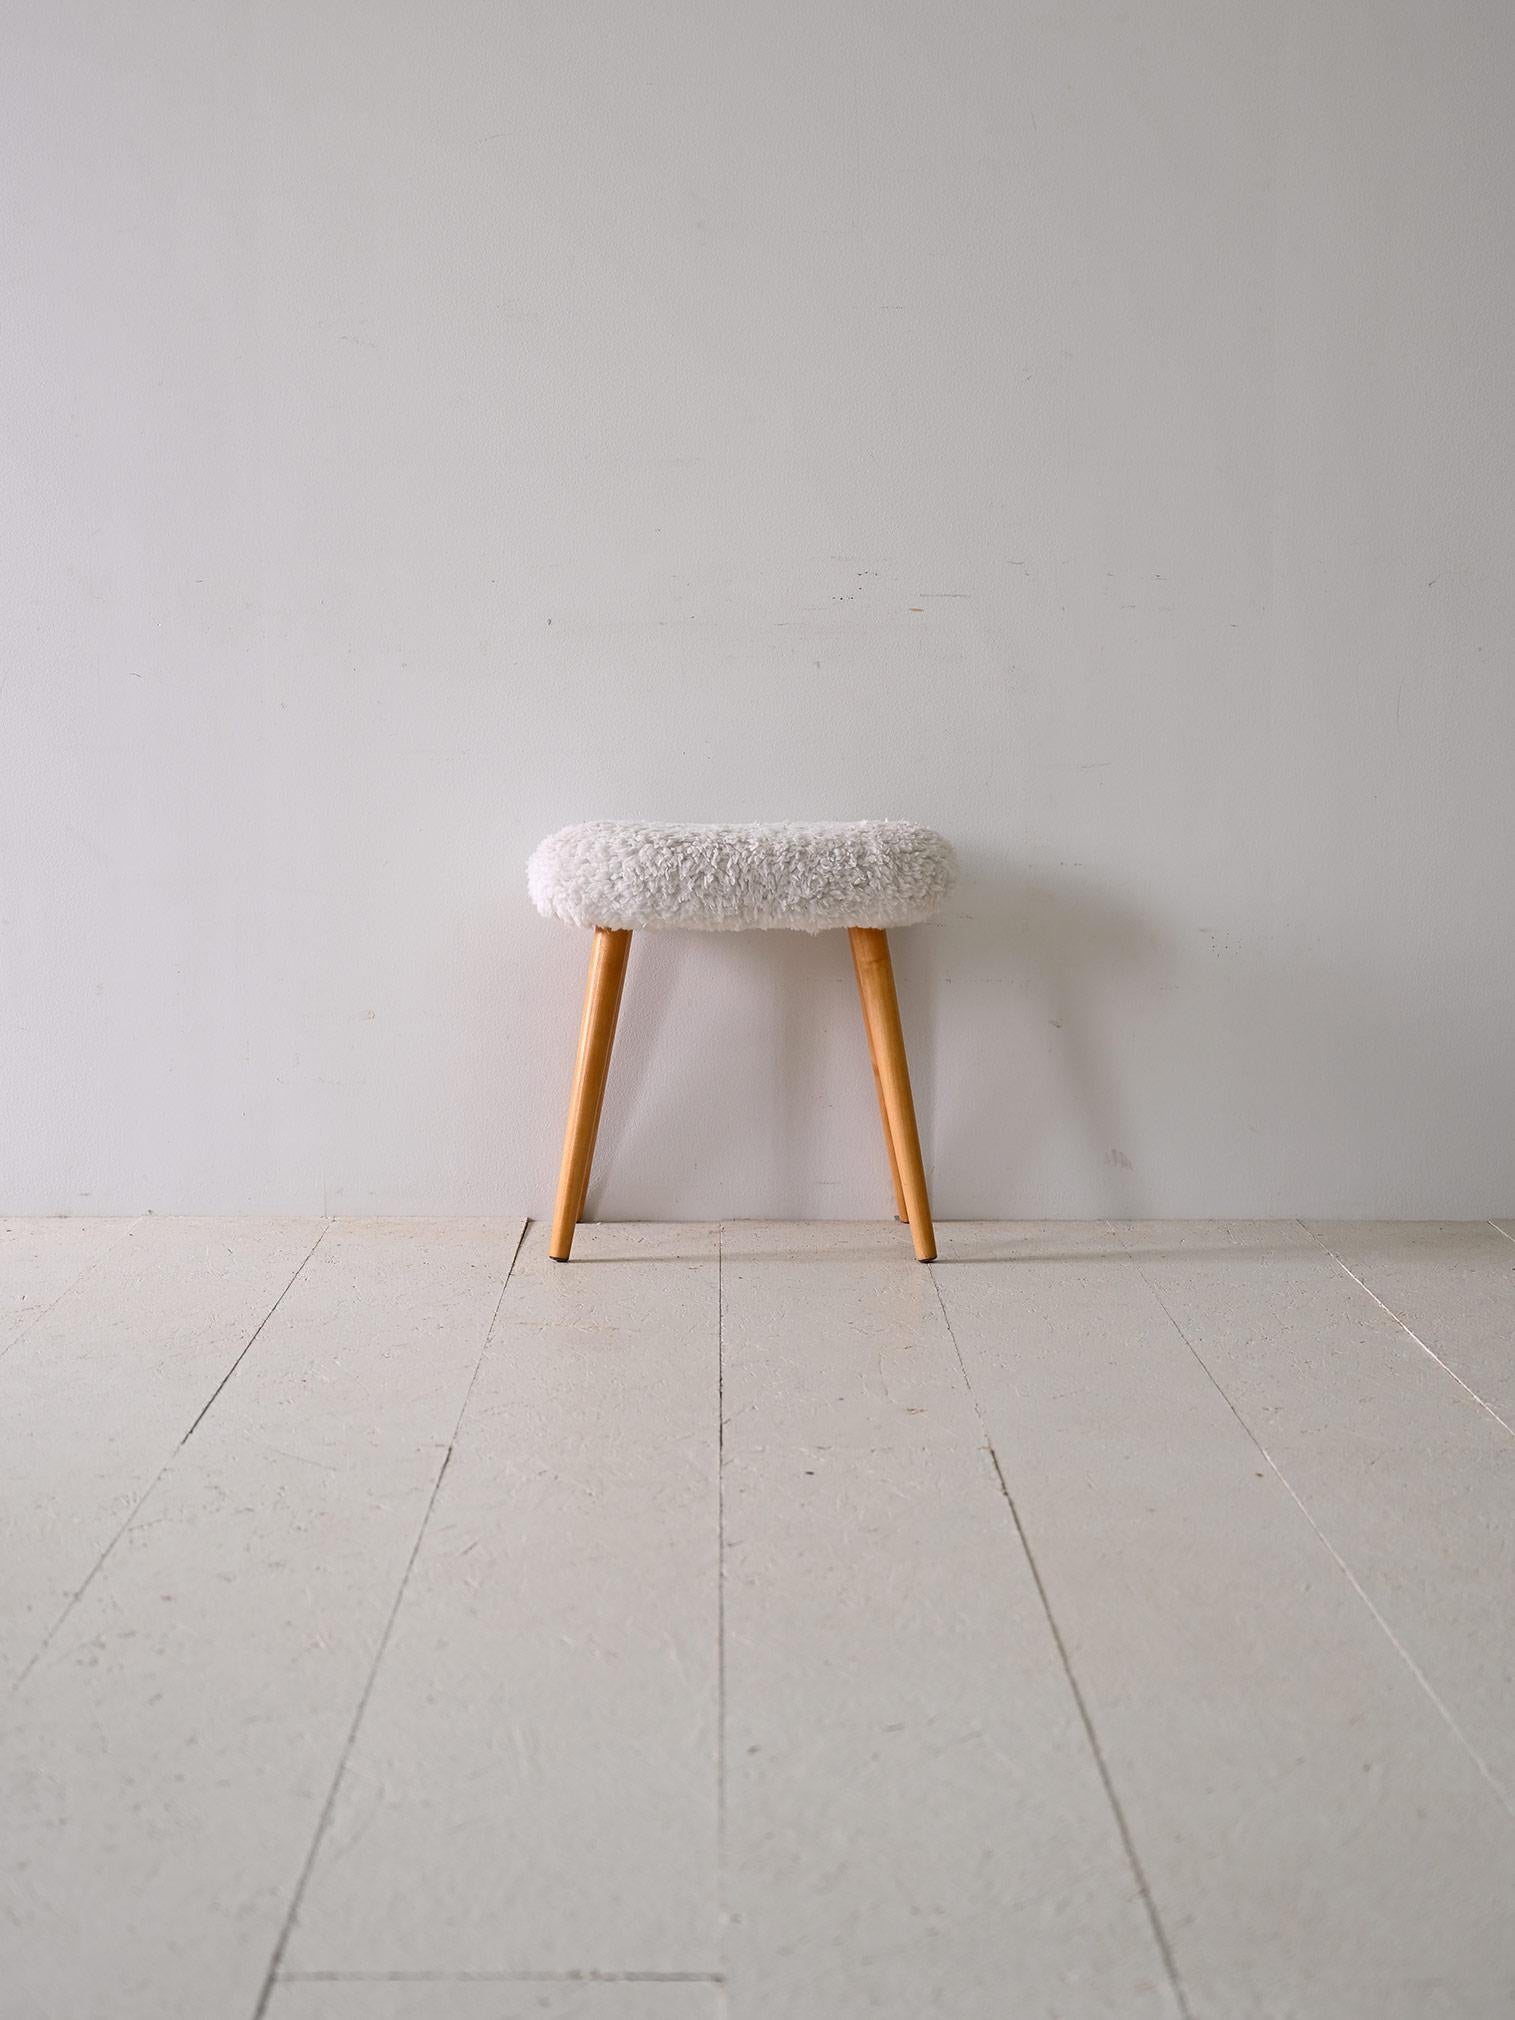 1960s stool lined with long-haired fabric.
 
With small dimensions, this stool is perfect for adding a touch of personality and functionality to any space. The long-haired fabric adds an element of elegance and softness to the seat.

Ideal as an